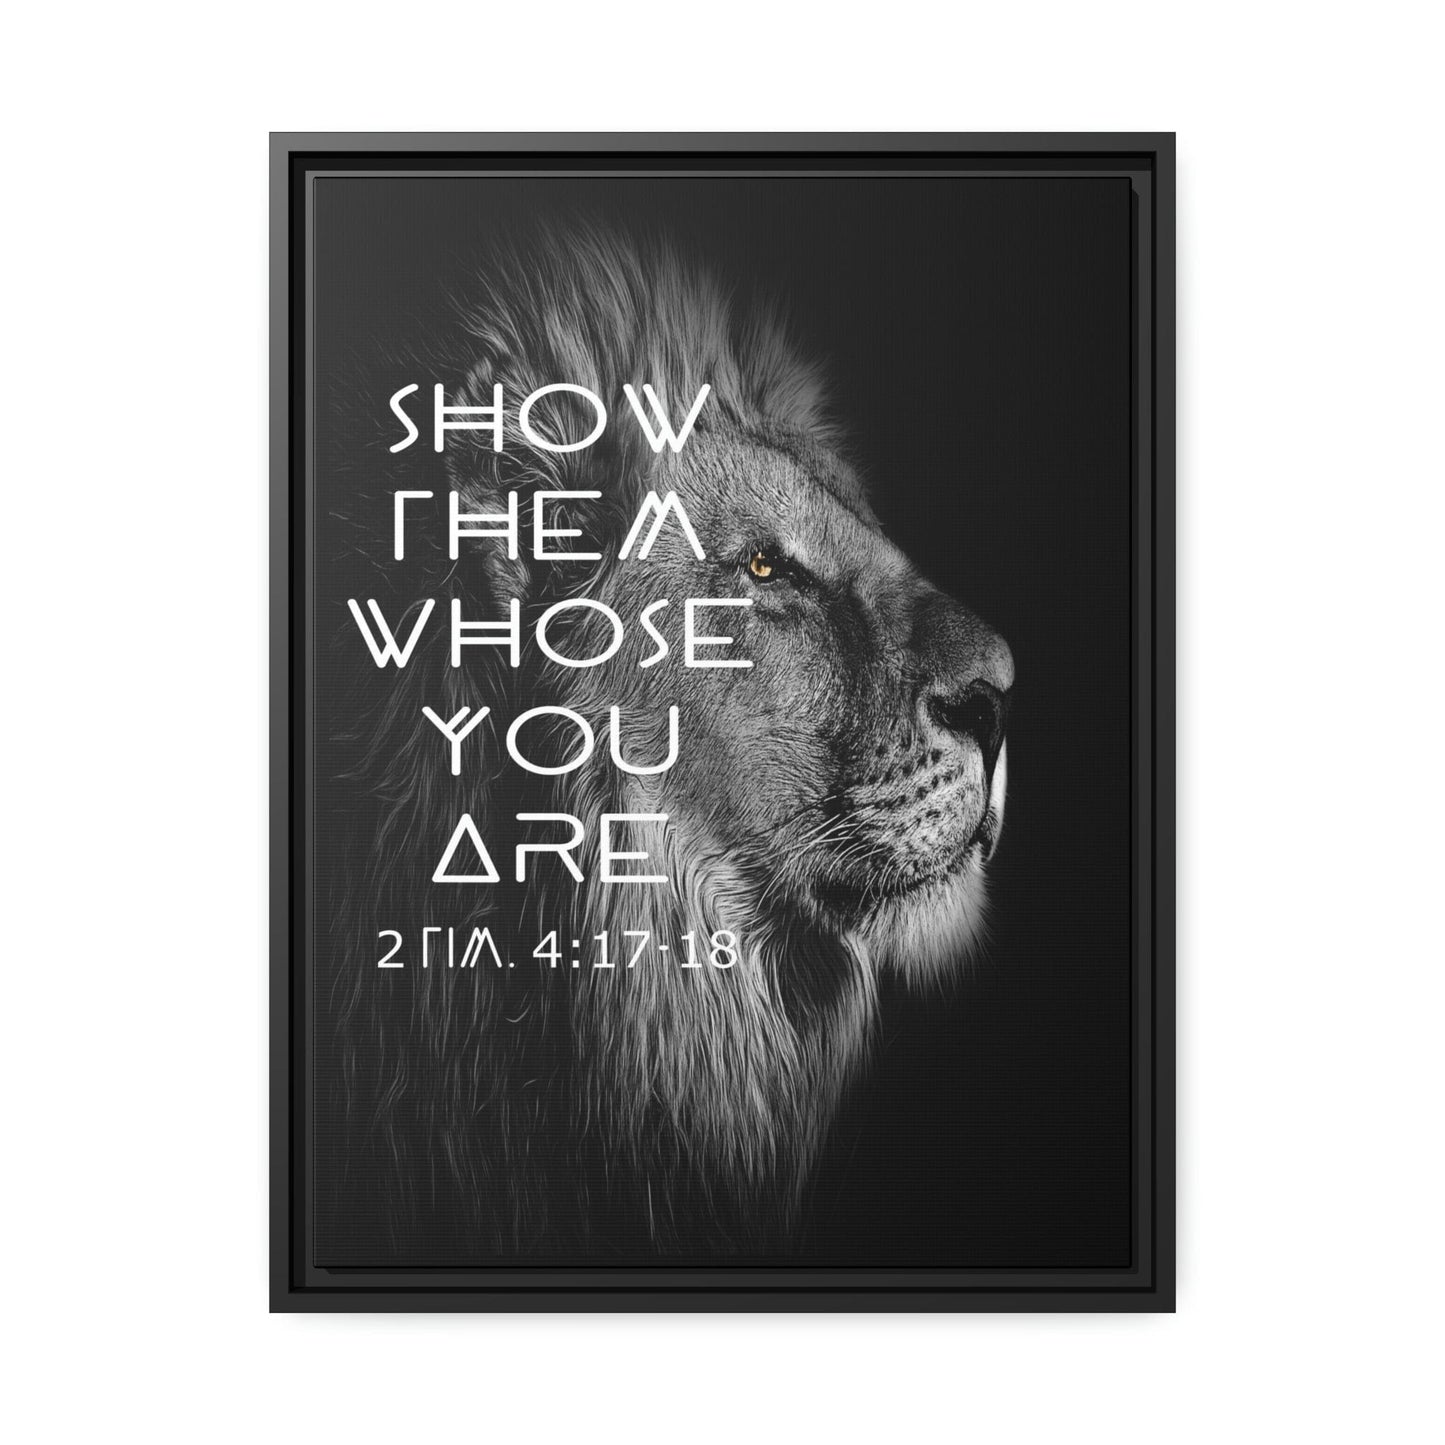 Printify Canvas 18″ x 24″ (Vertical) / Black / 1.25" Show Them Whose You Are - 2 Tim 4:17-18 Christian Canvas Wall Art